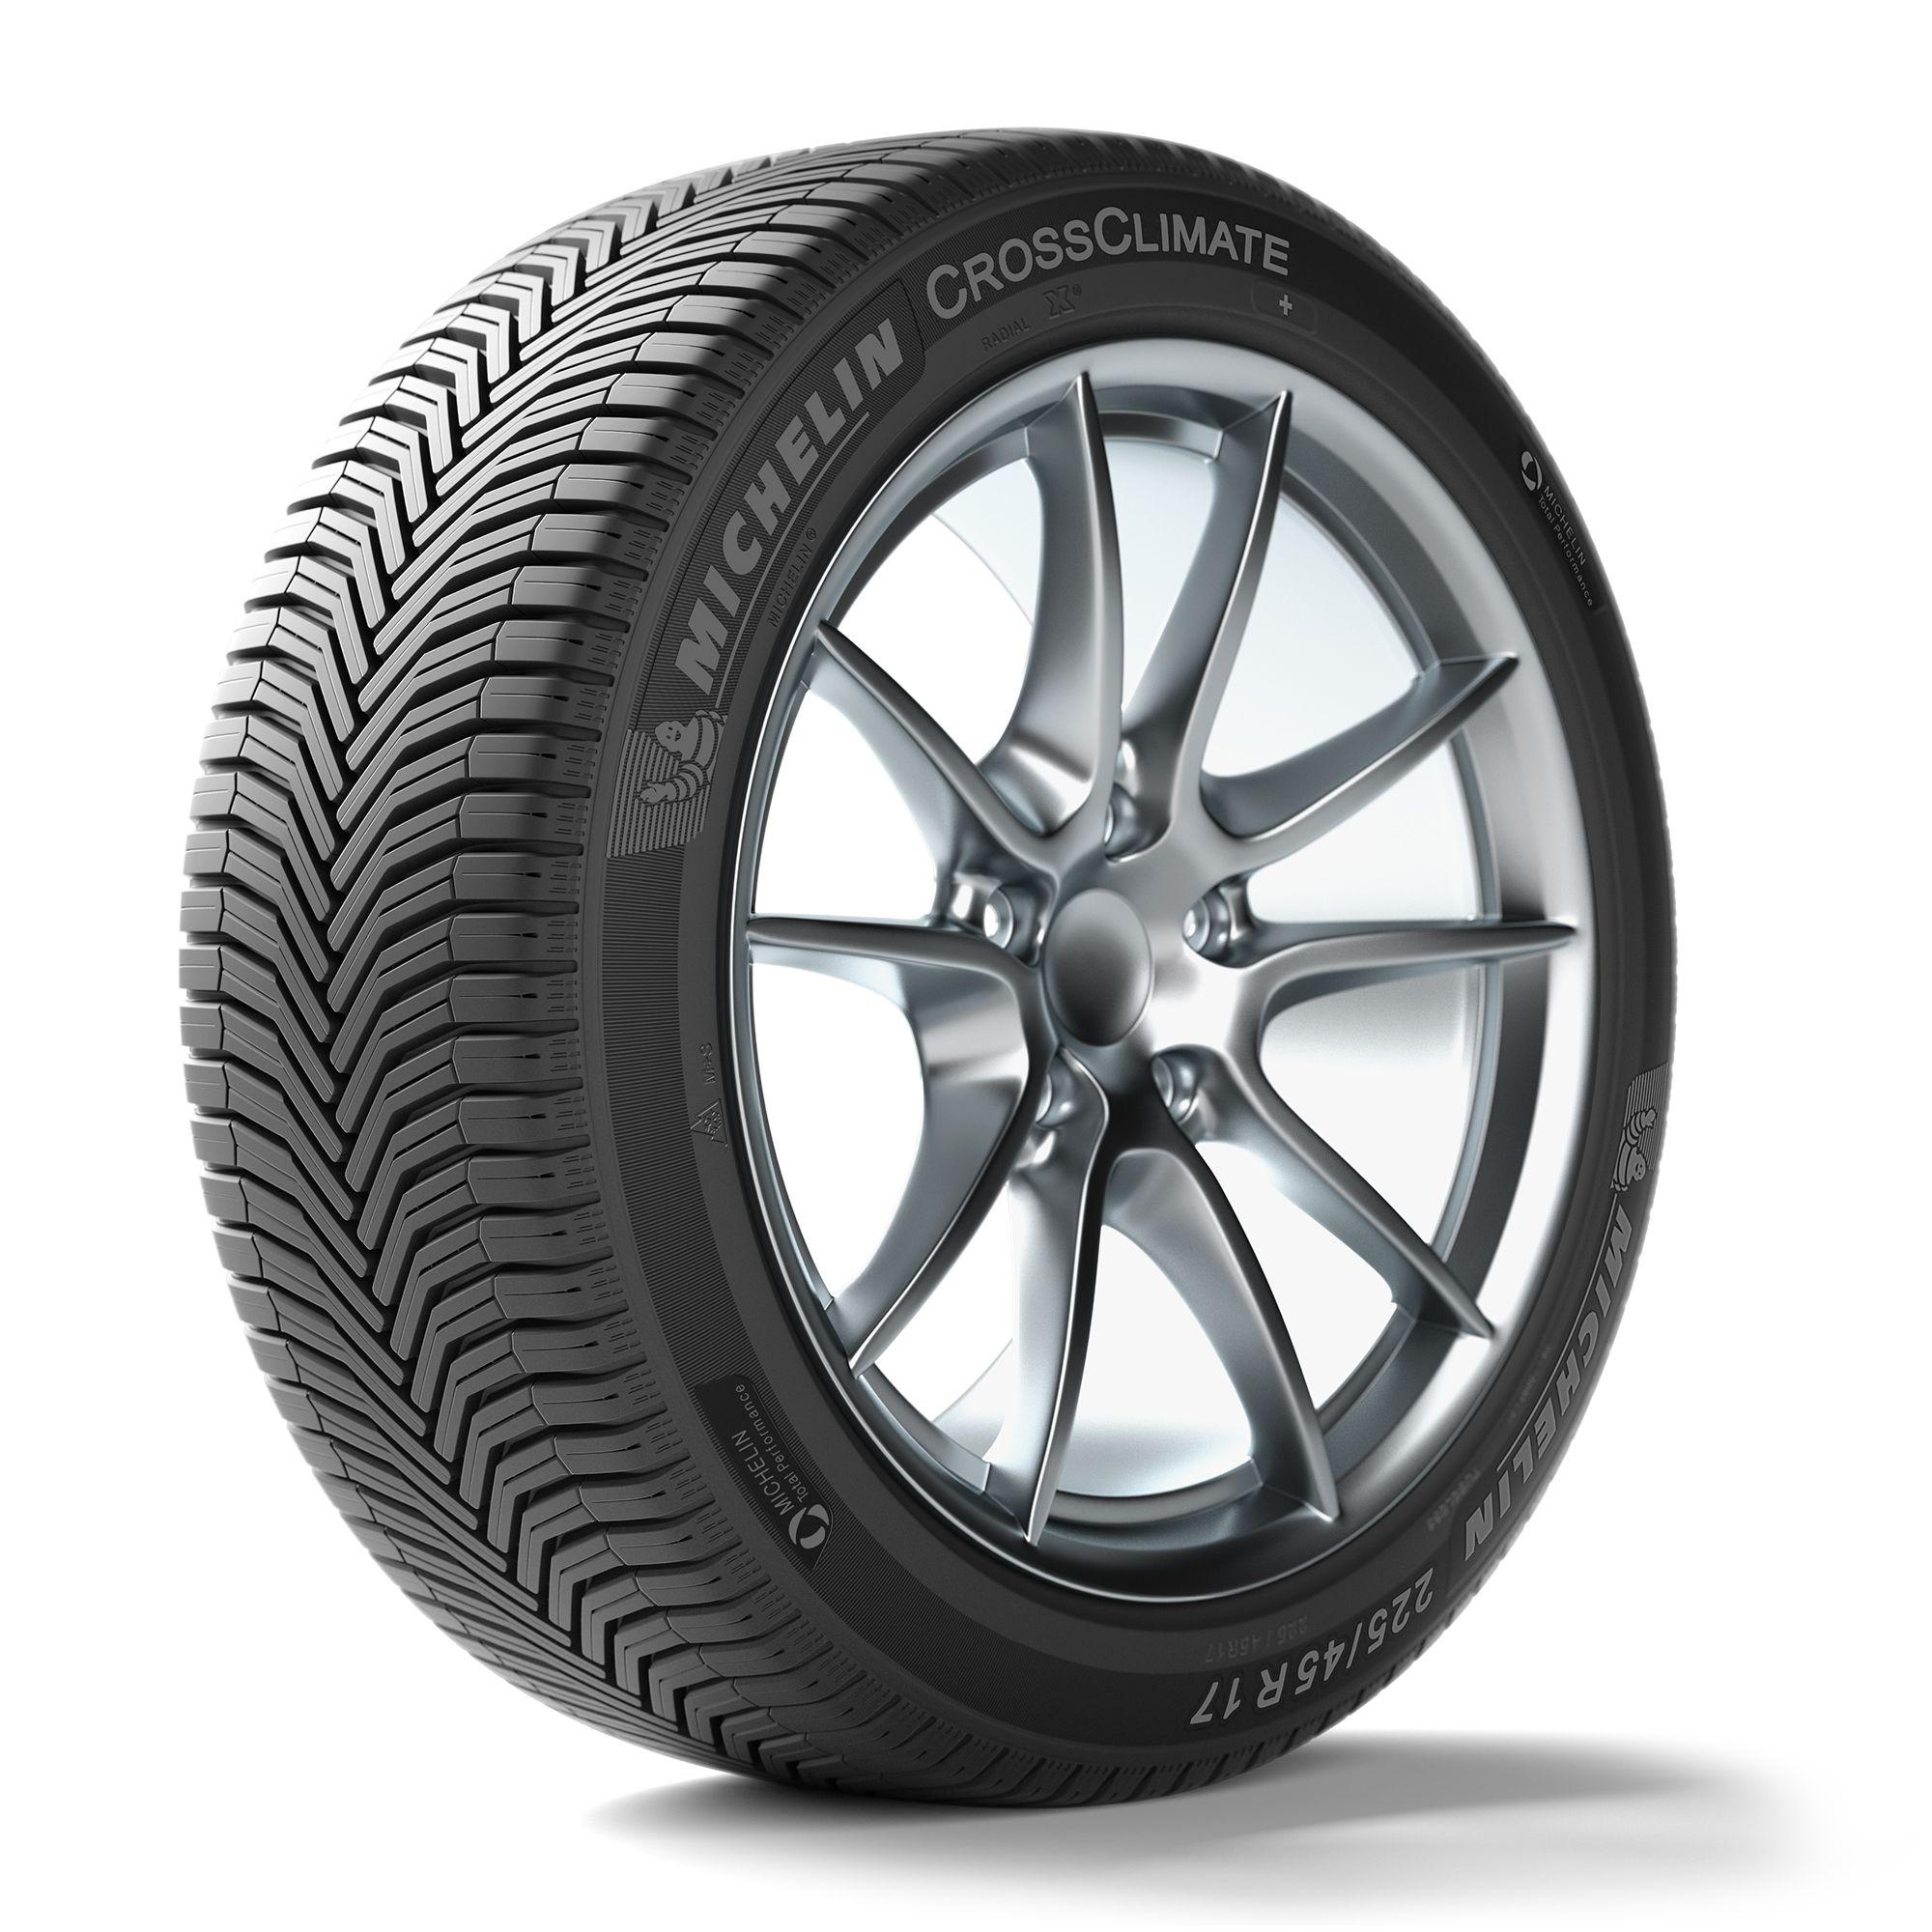 Anvelope all seasons MICHELIN CROSSCLIMATE+ XL 185/65 R15 92T